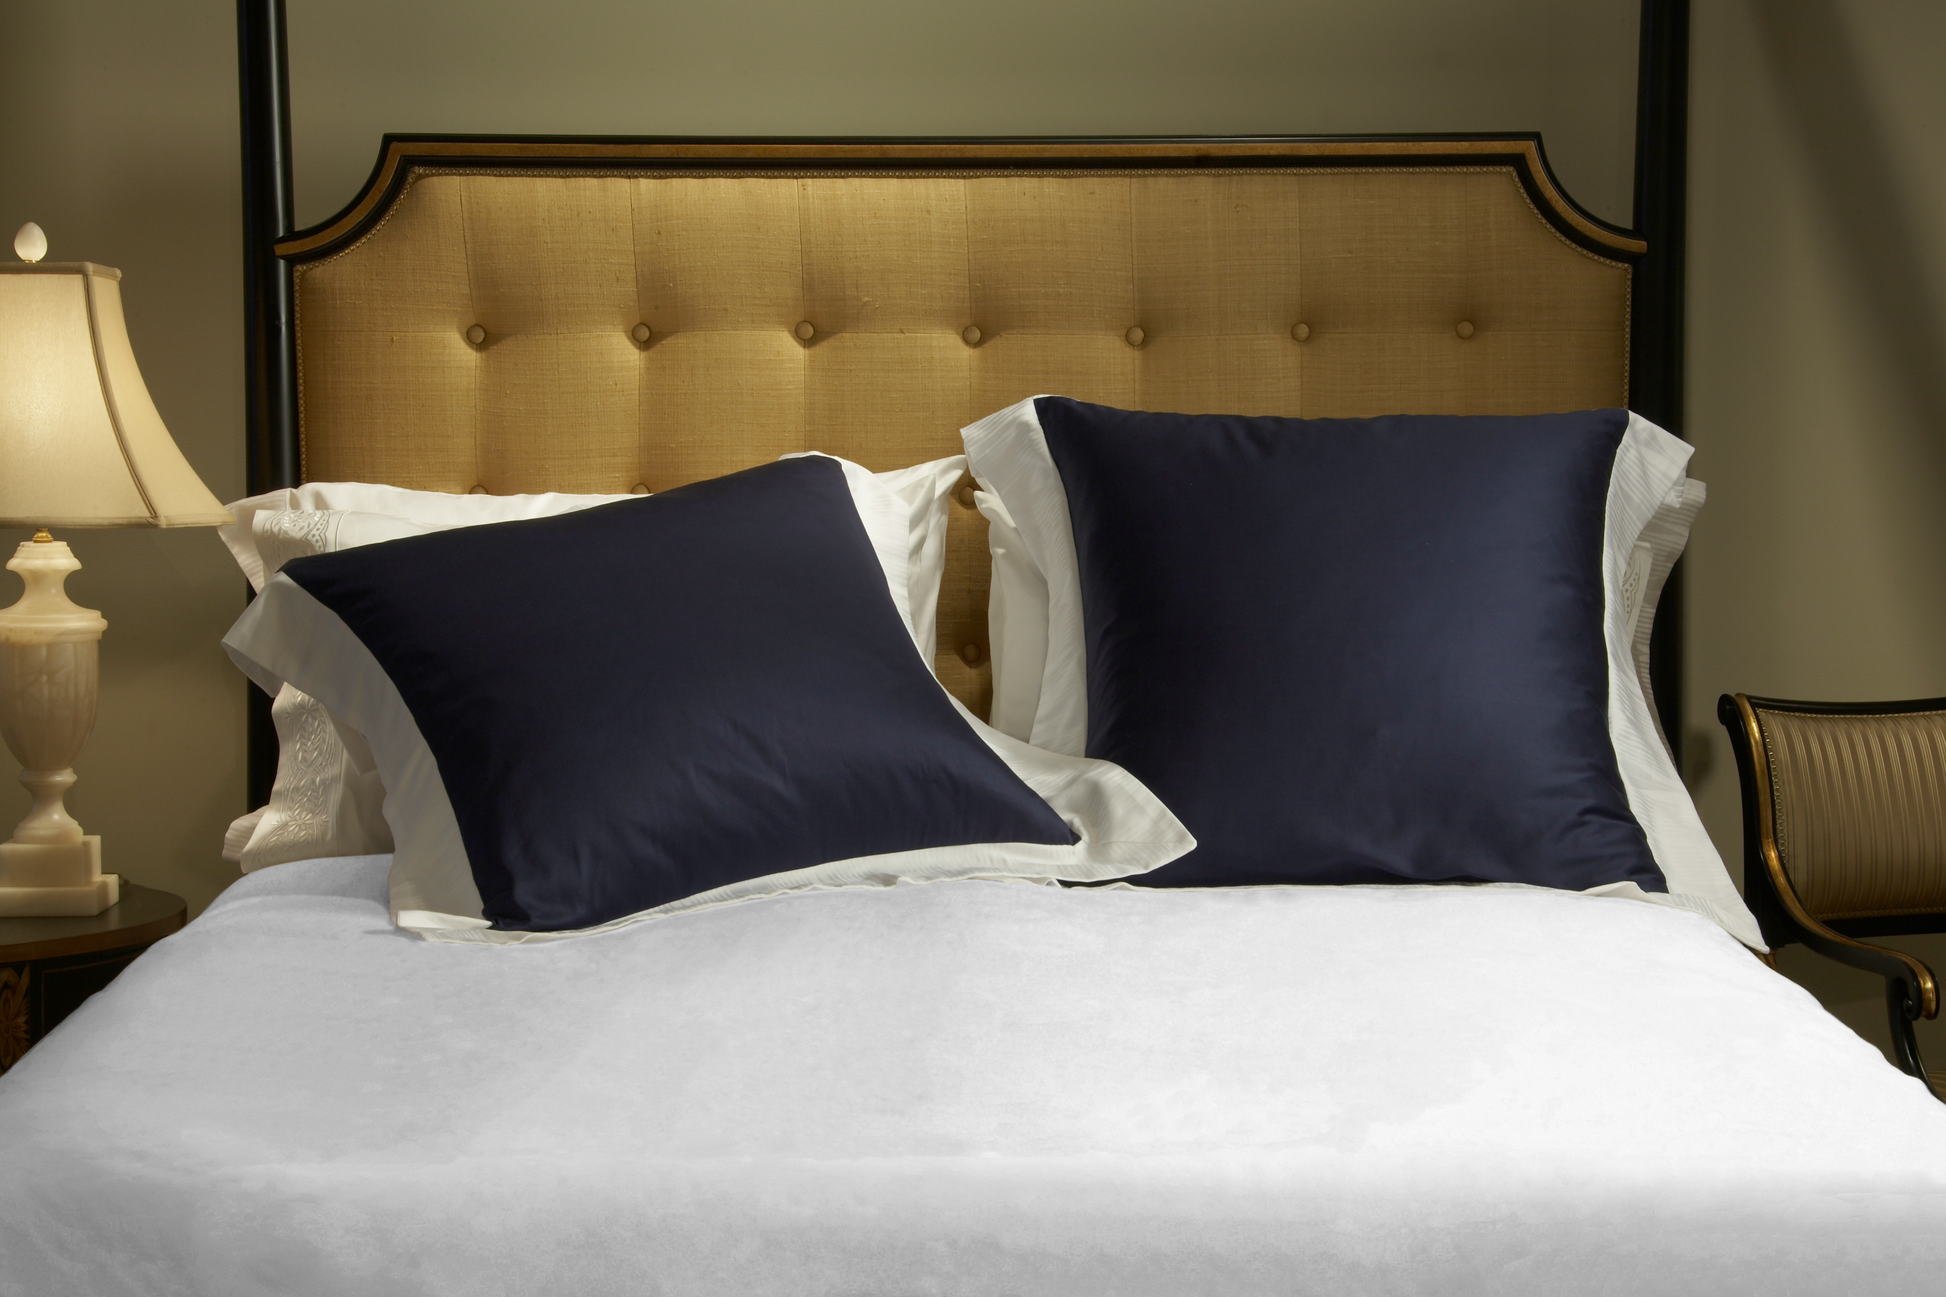 Photo of  a bed by WAB Studios with Two Navy Soleil Sateen Euro Shams with White Soleil Jacquard Borders on 4 sides with a White Soleil Sateen Duvet Cover.  Two queen pillows behind are Kearsley White Essentials Sateen with White Tyrolean II Embroidery on the cuffs.  Woven and made in Italy to the highest ethical, environmental, and craftsmanship standards.  Luxury Linens